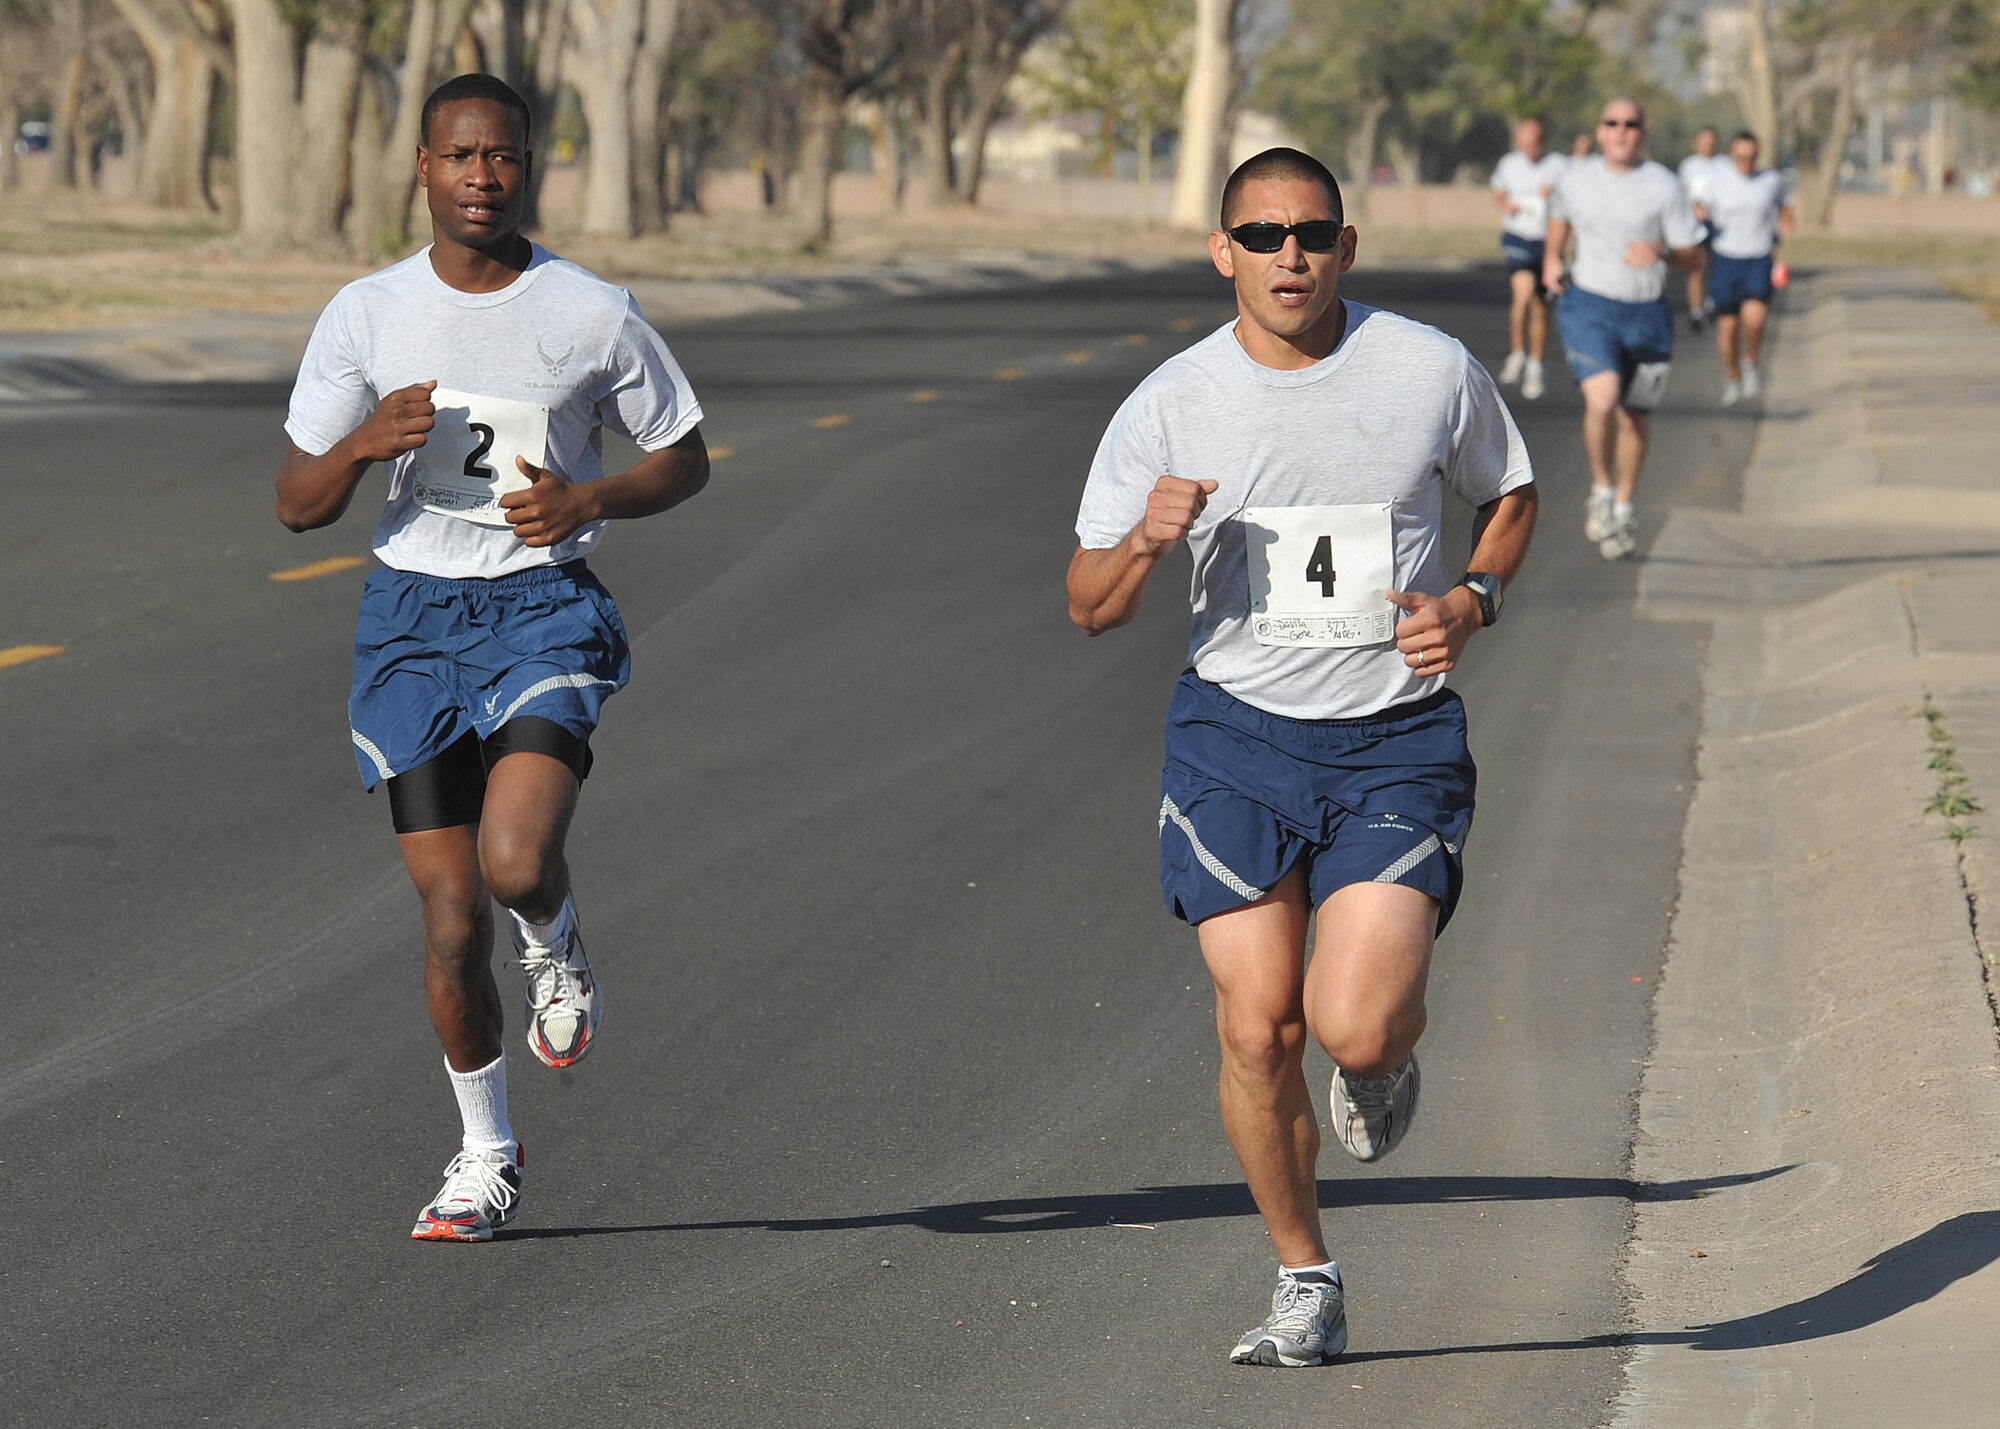 Senior Airman Gene Davila, 377th Aerospace Medicine Squadron, leads in the 5k run Oct. 13 as part of Wing Sports Day events.  U.S. Air Force Photo by Todd Berenger
